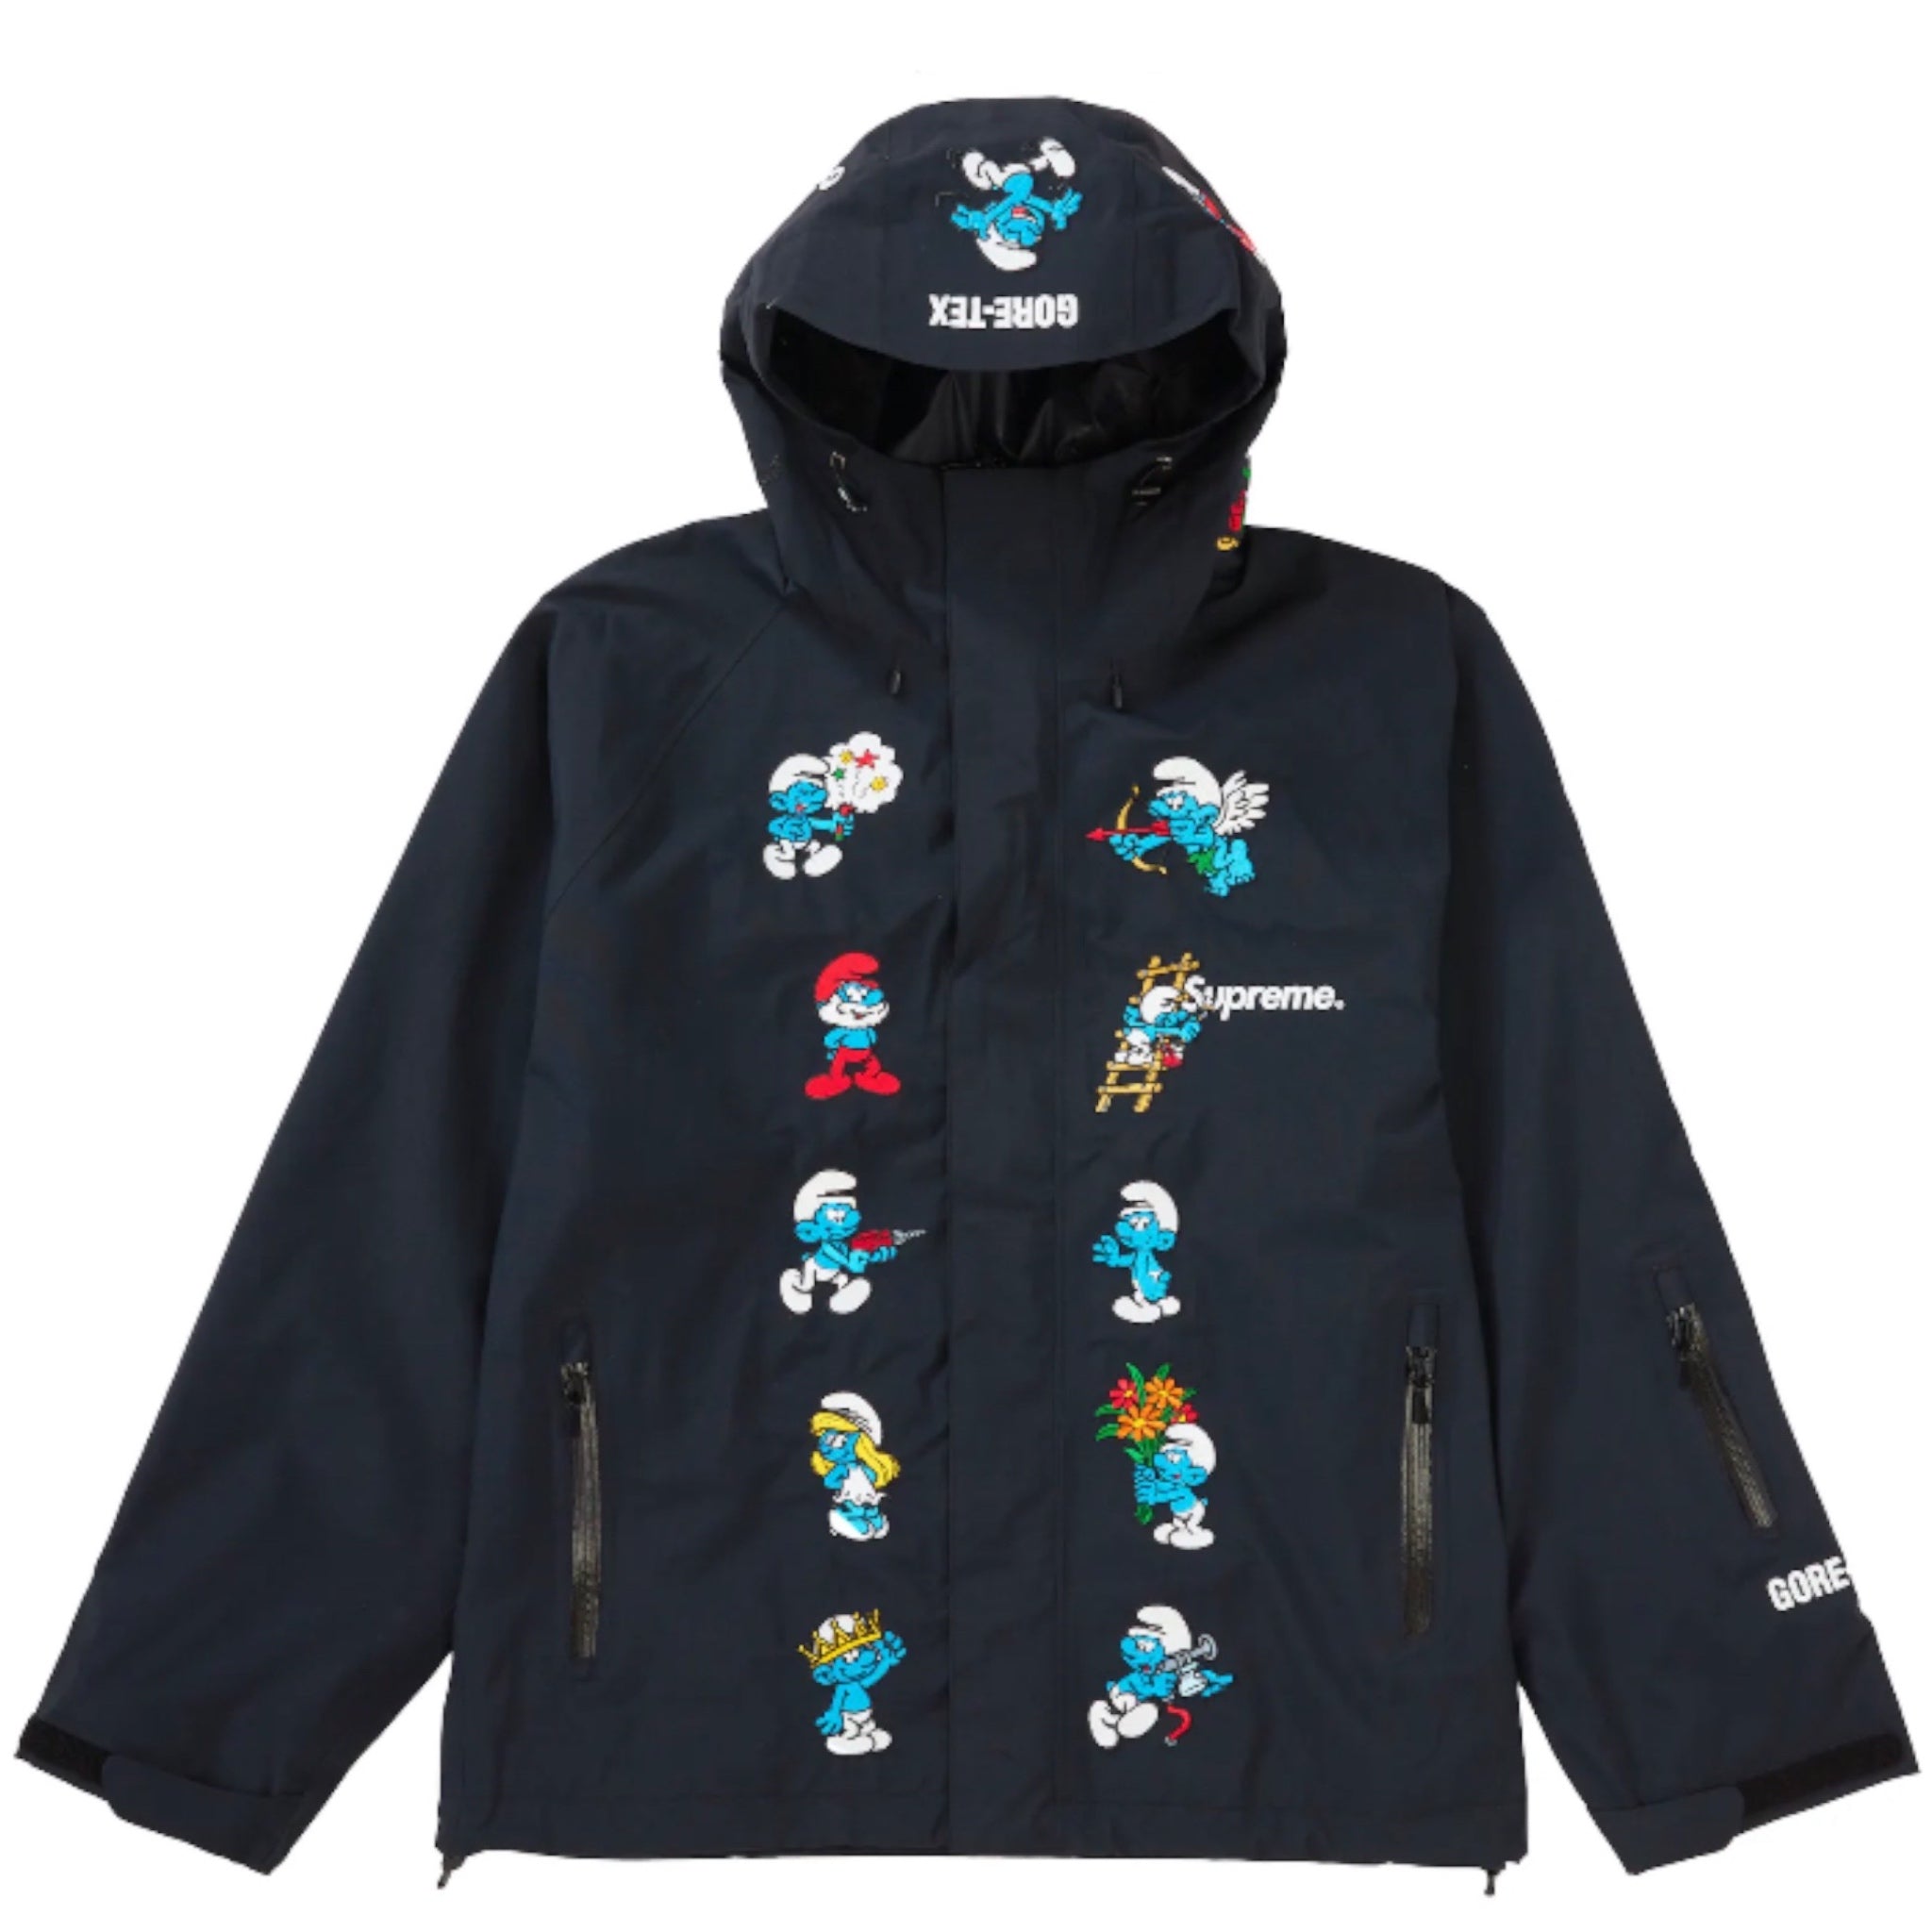 Supreme x The North Face Smurfs GORE-TEX Shell Jacket